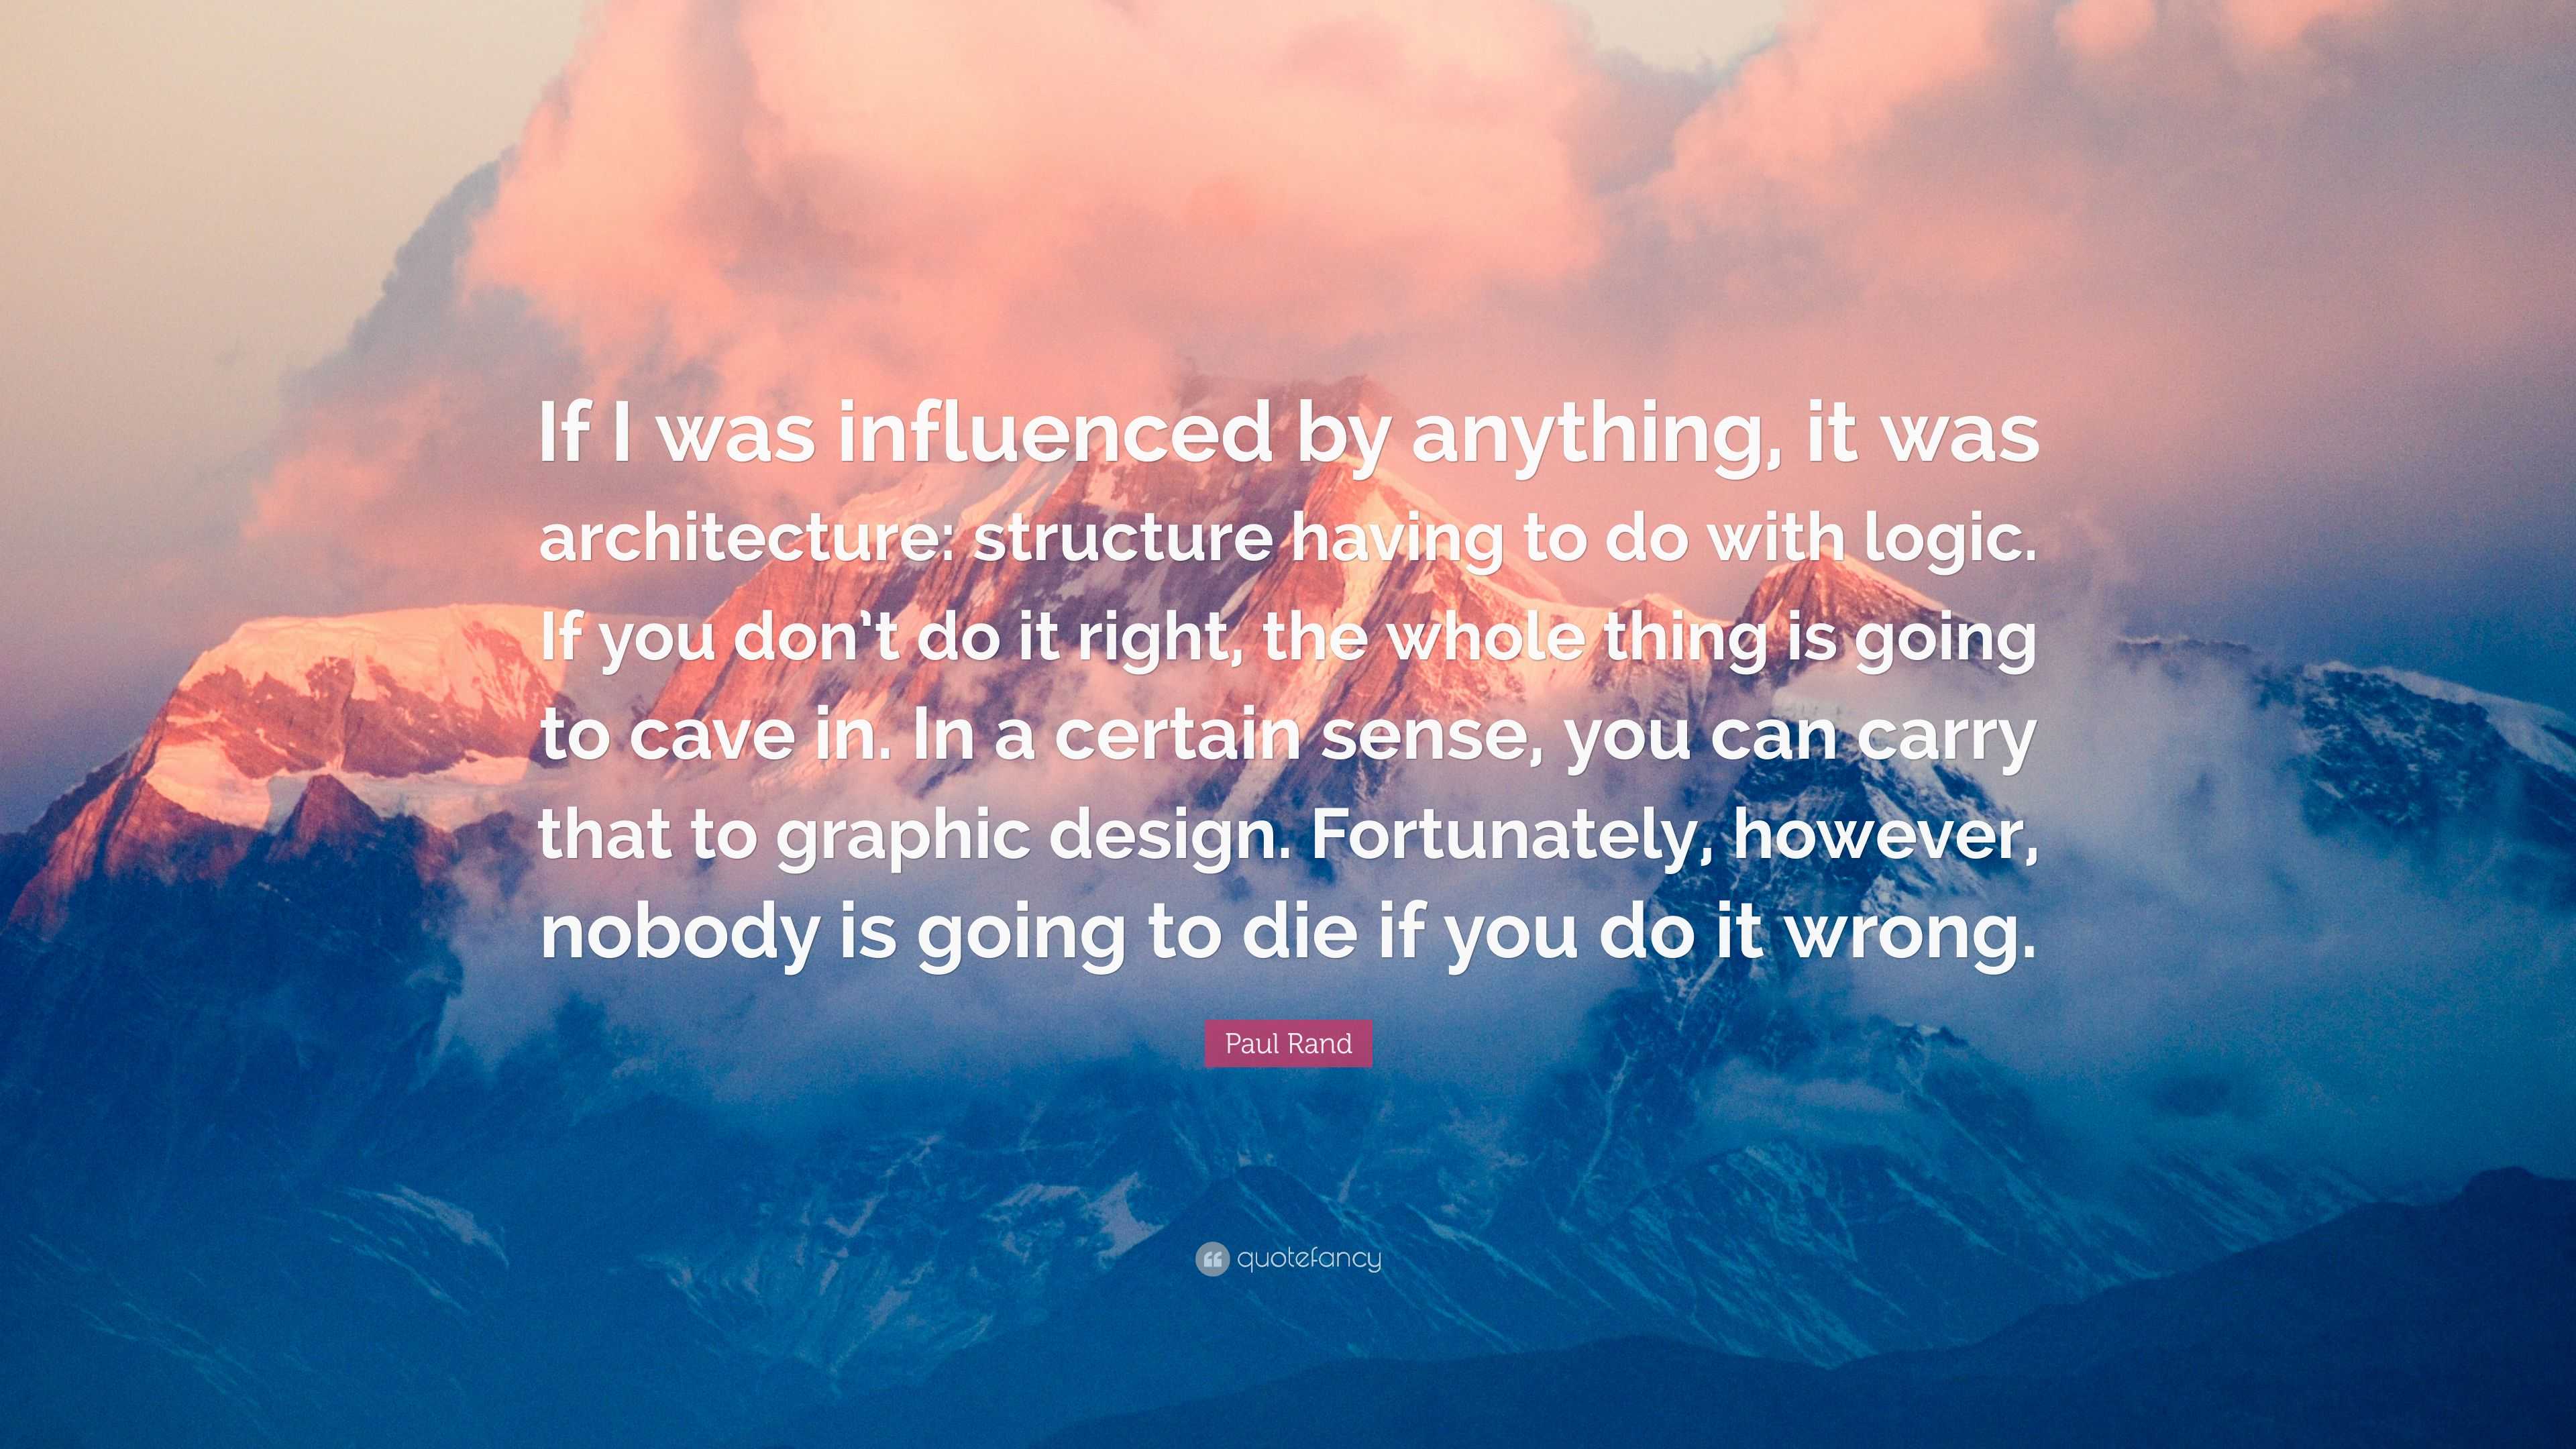 Paul Rand Quote: “If I was influenced by anything, it was architecture ...